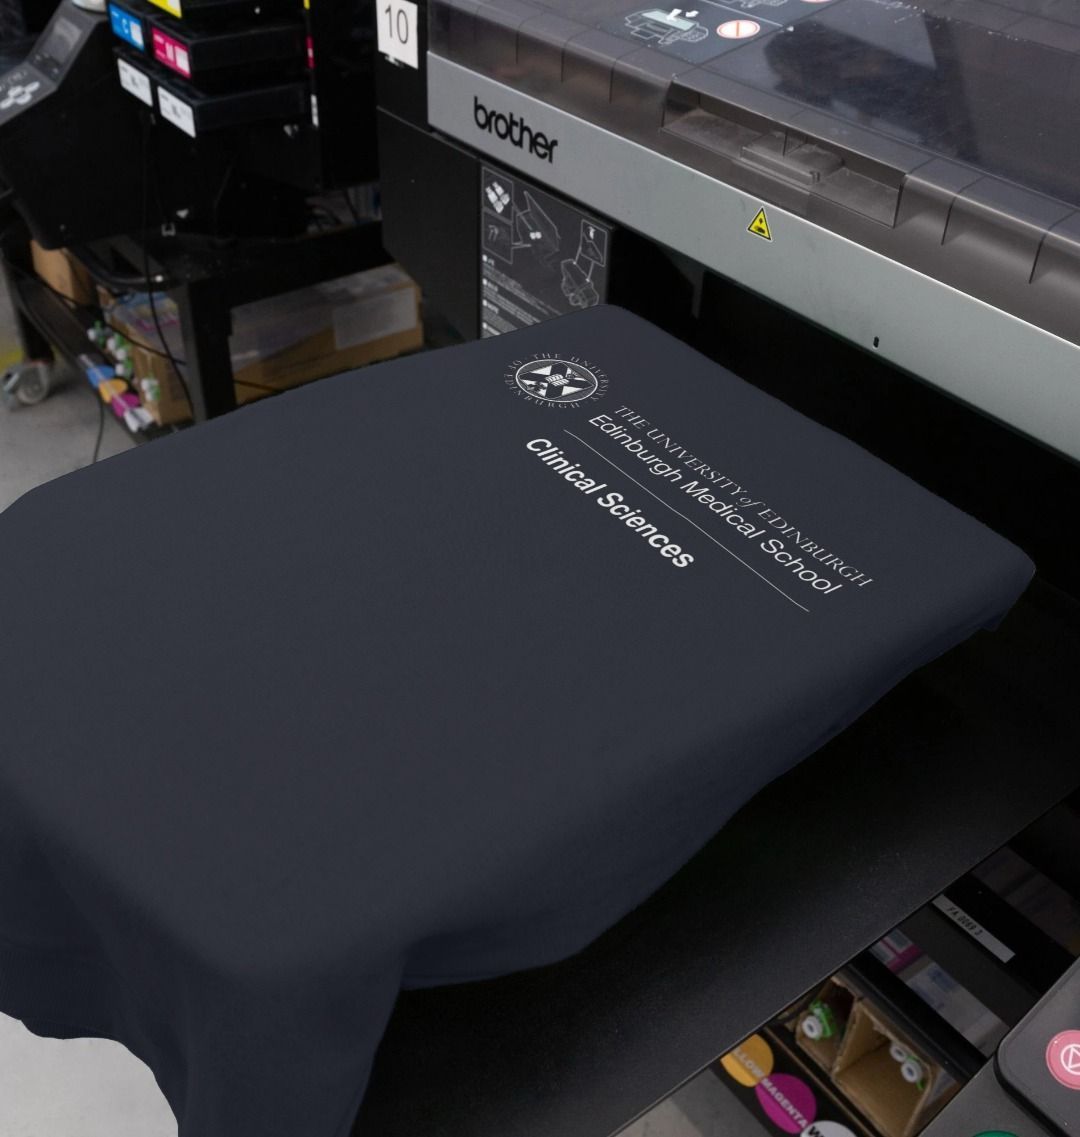 Our Edinburgh Medical School - Clinical Sciences Sweatshirt  being printed by our print on demand partner, teemill.